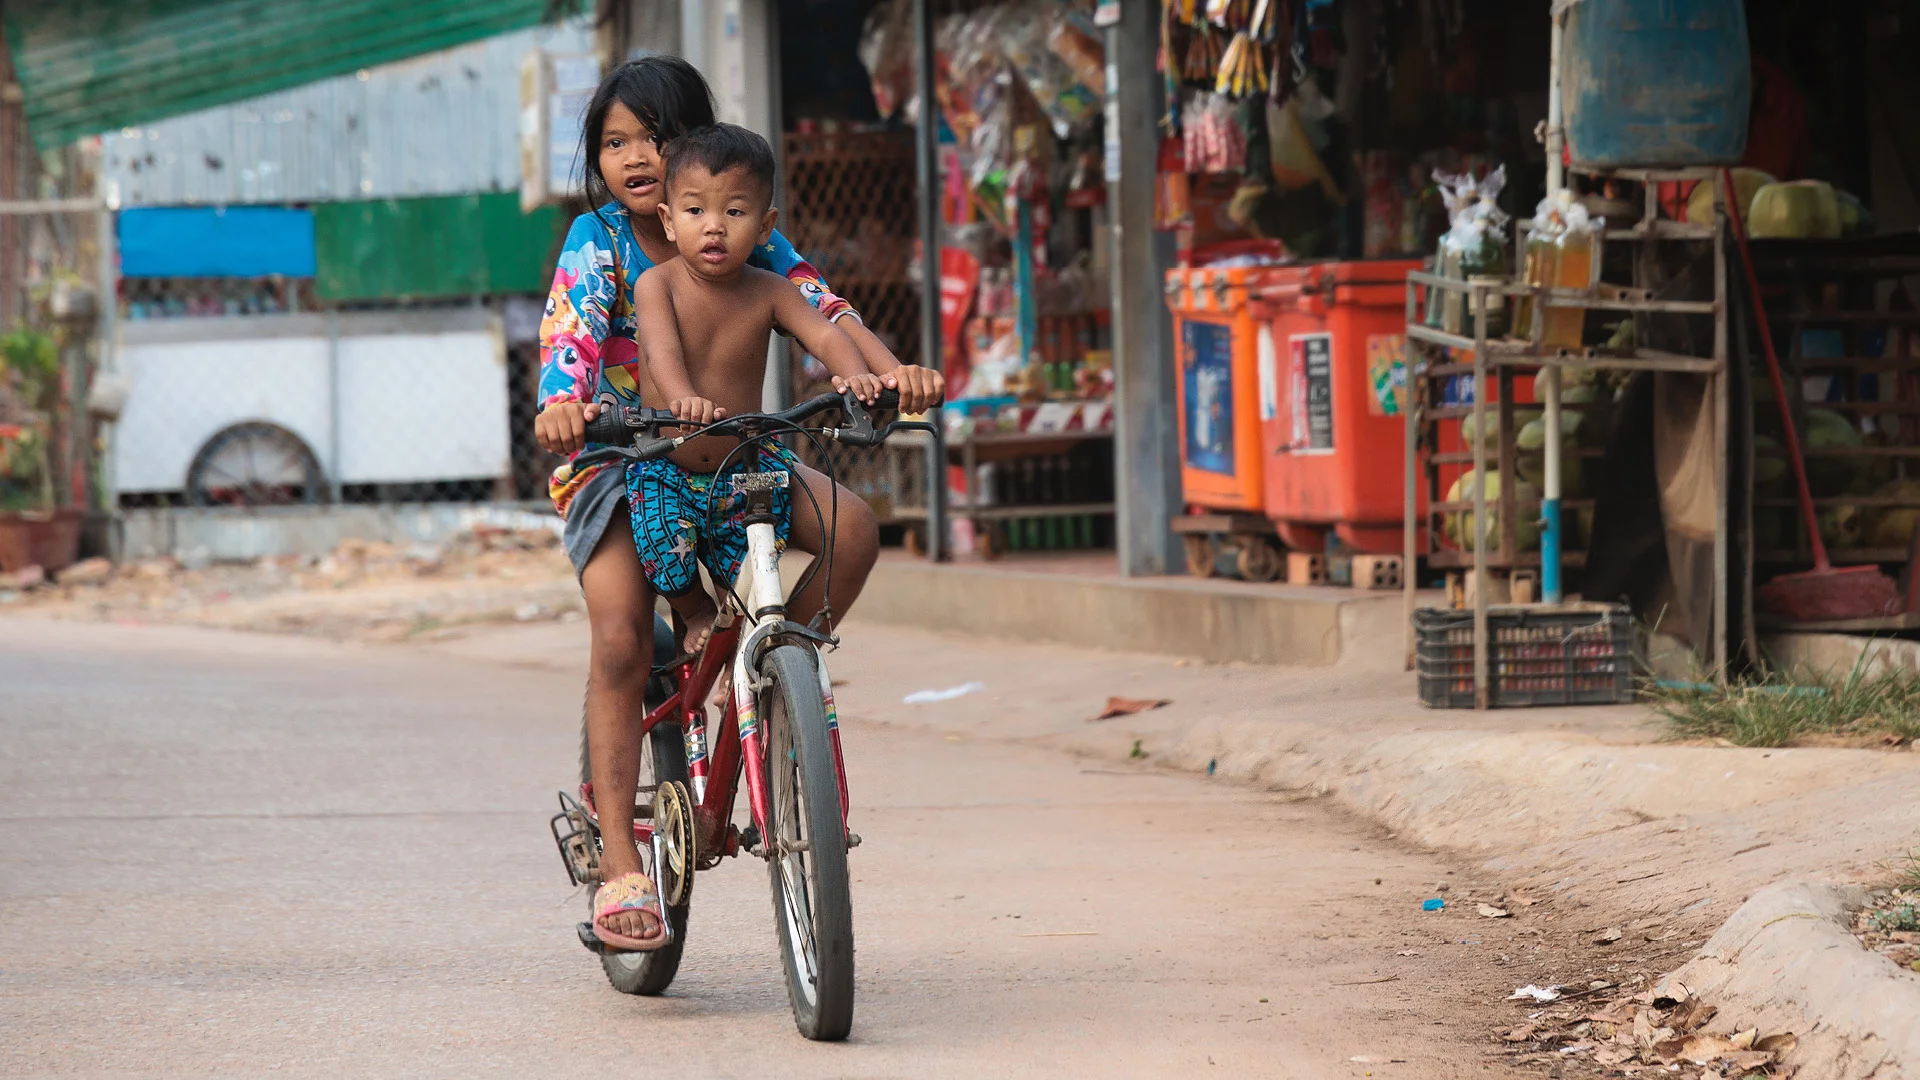 Brother and sister playing on bicycle in a dusty neighbourhood in Siem Reap